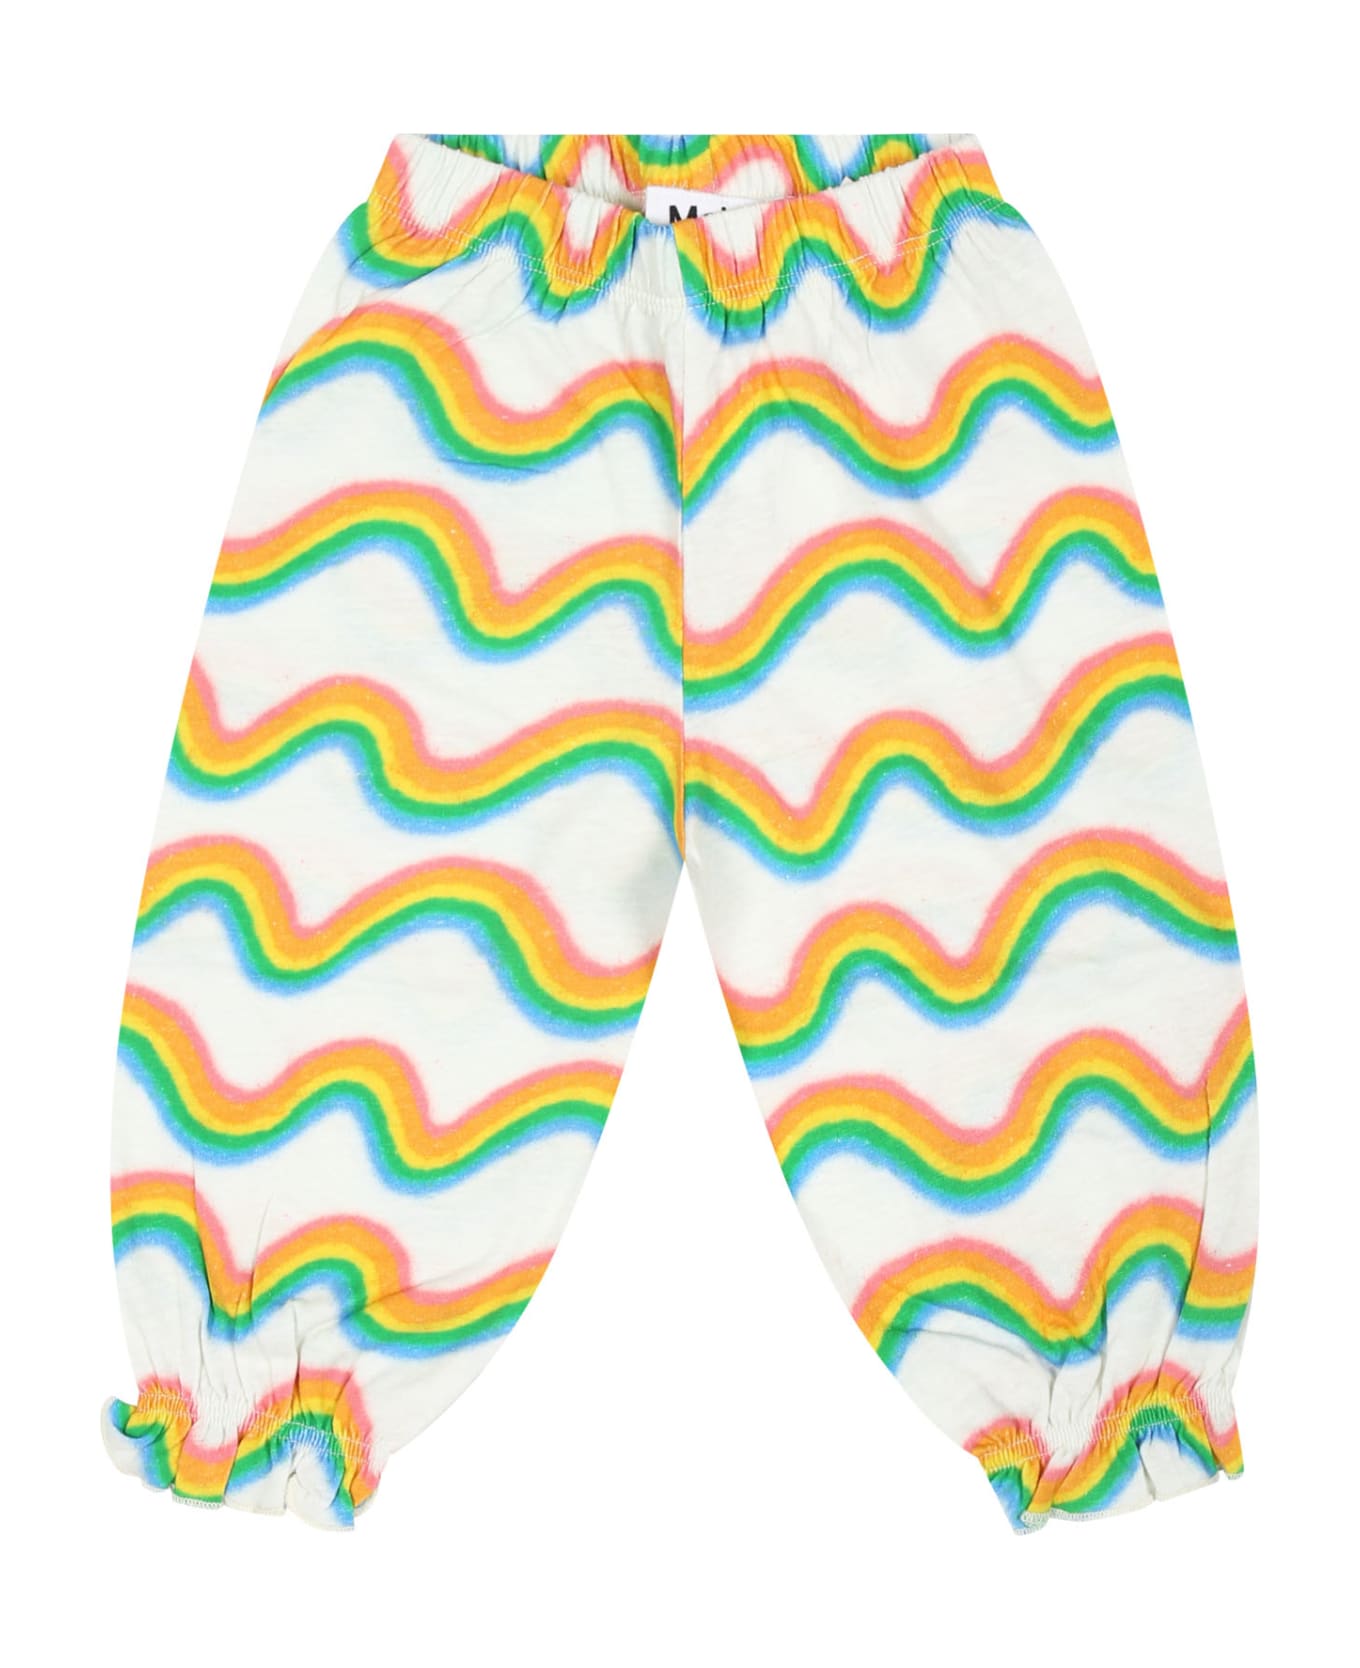 Molo White Trousers For Baby Girl With Rainbow Print - Multicolor ボトムス